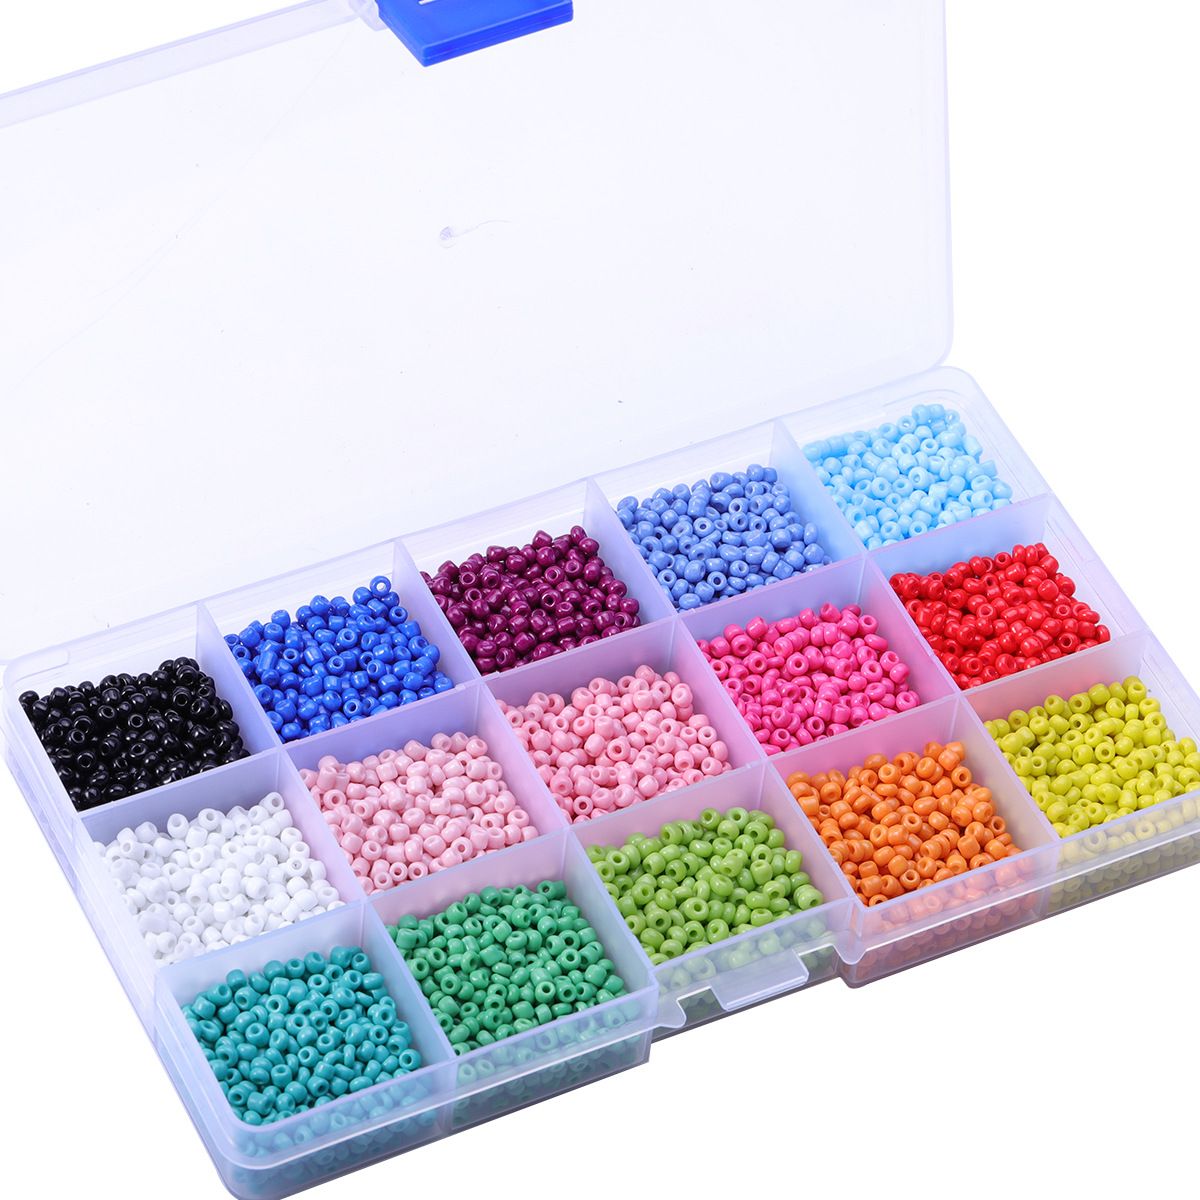 Glass Seed Beads Kit LDPF 3mm Loose Pony Kandi Beads W/ Line, Lobster  Buckle & Open Ring For DIY Jewelry Crafters From Fandh112233, $10.6